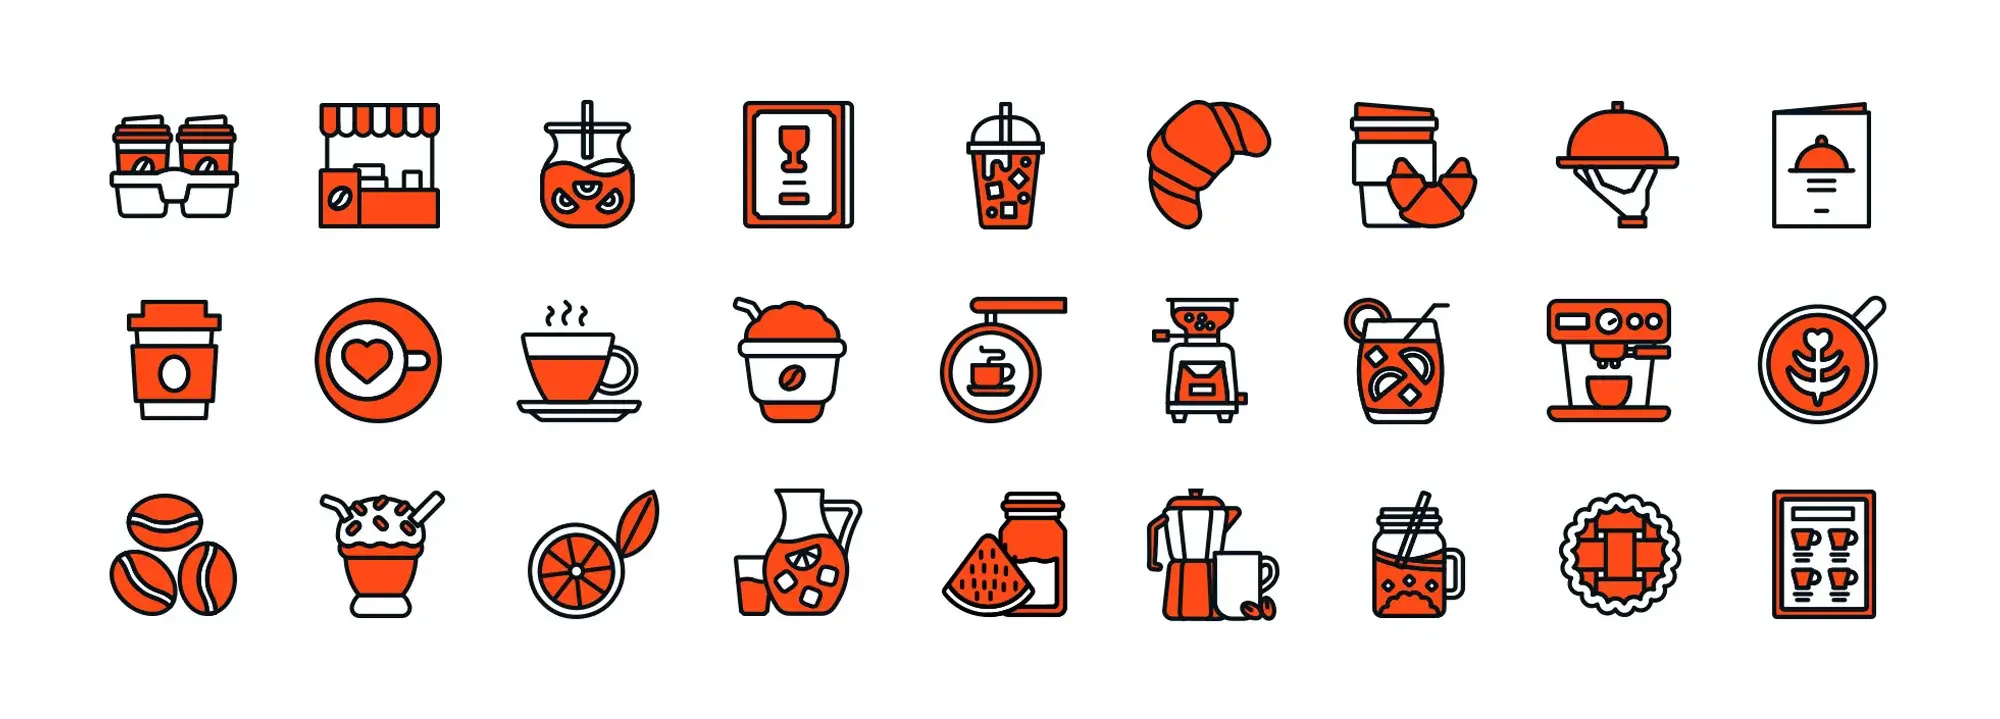 Versatile collection of WordPress icons free for personal and commercial use